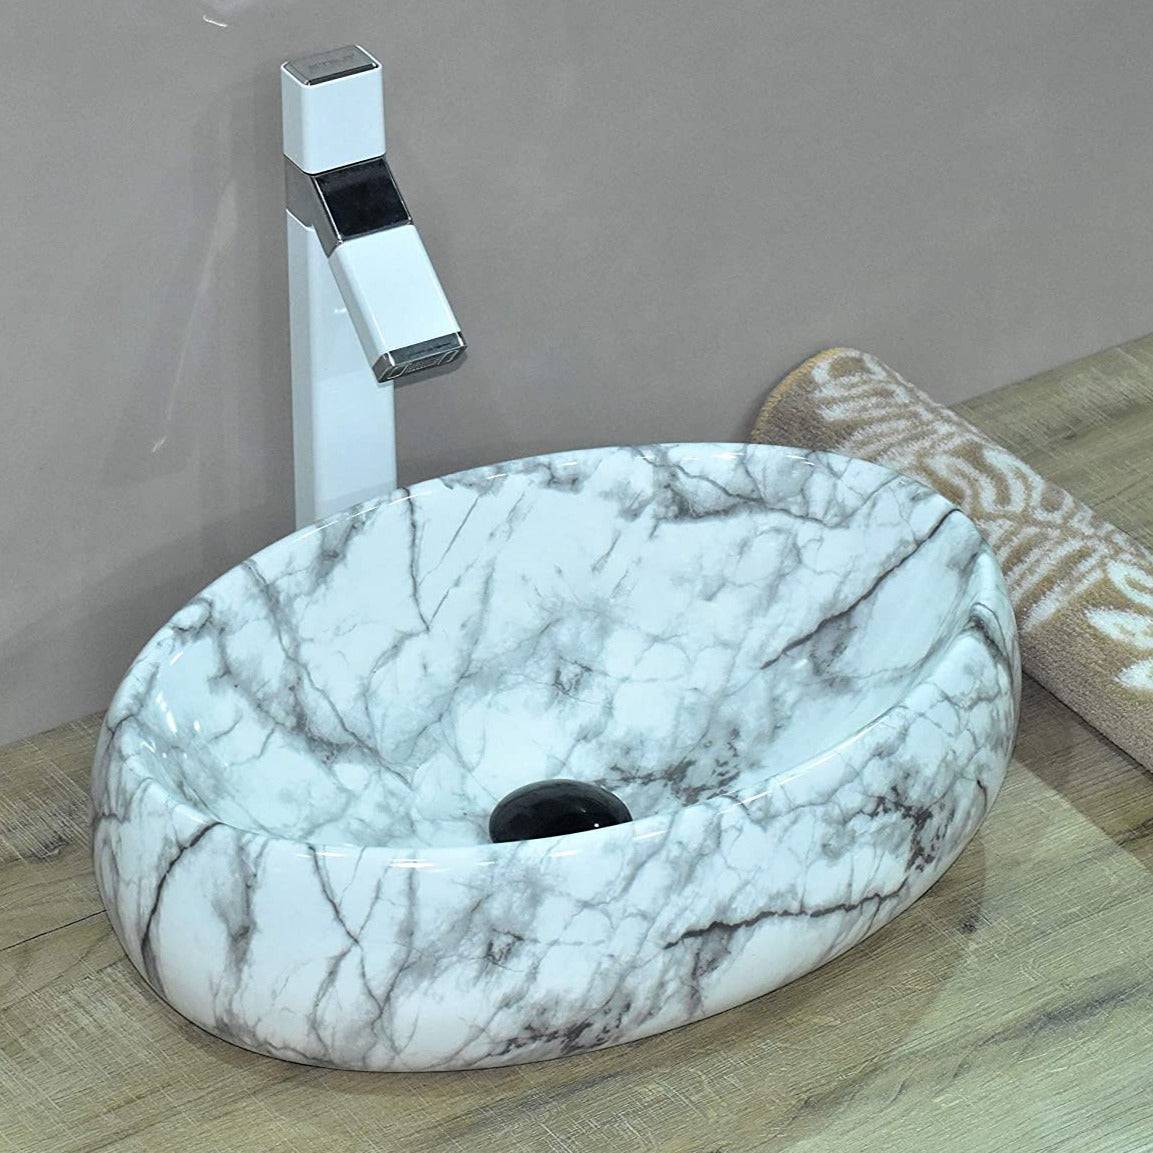 InArt Ceramic Counter or Table Top Wash Basin 48x33 CM White ...